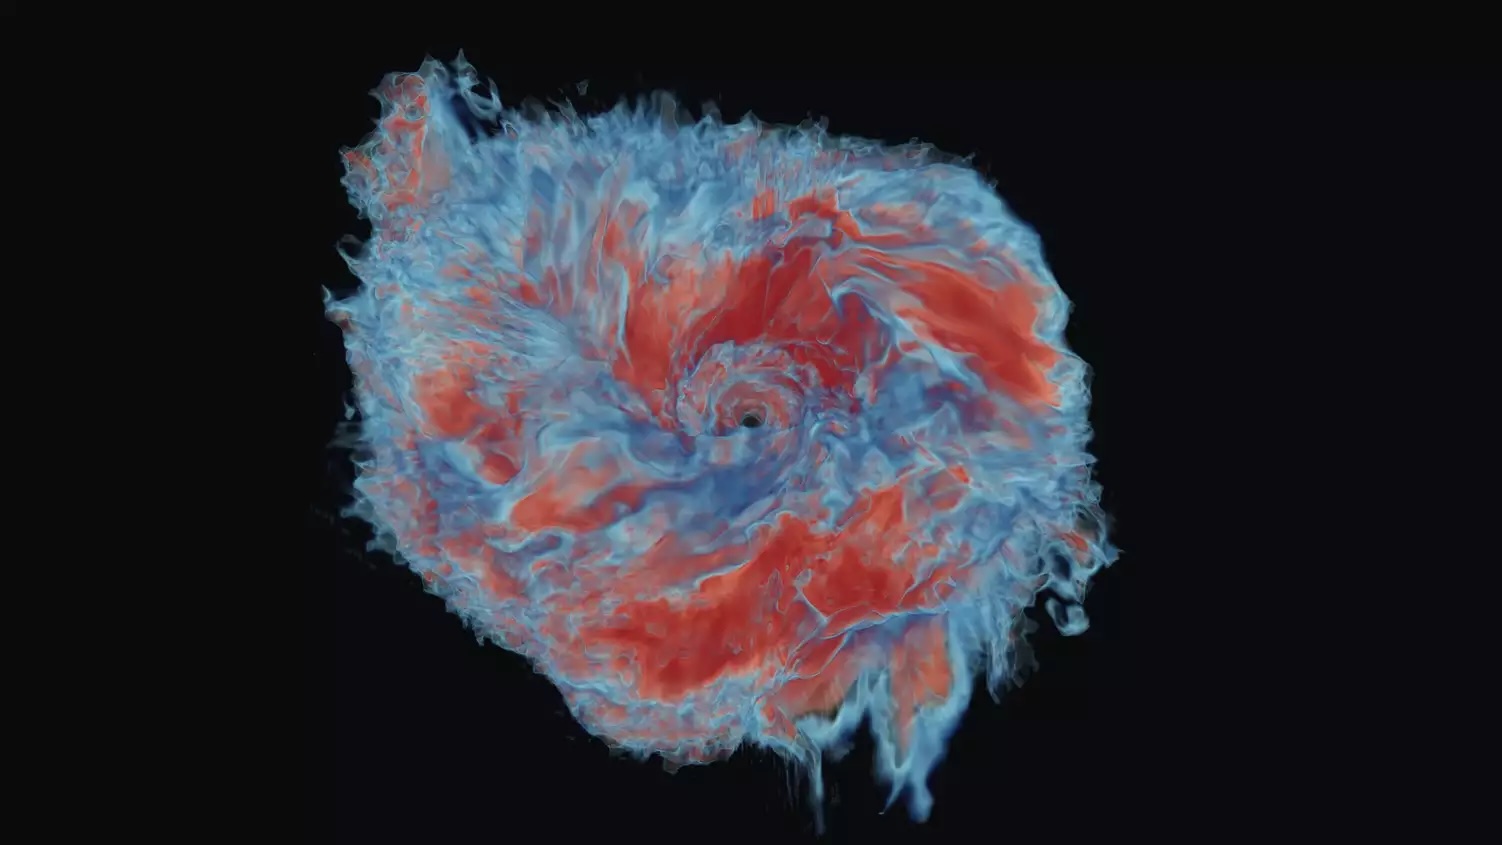 Numerical simulation of the resulting ejecta material of two merging neutron stars. Red colors refer to ejected material with a high fraction of neutrons which will appear typically redder than blue material that contains a higher fraction of protons. © I. Markin (University of Potsdam)